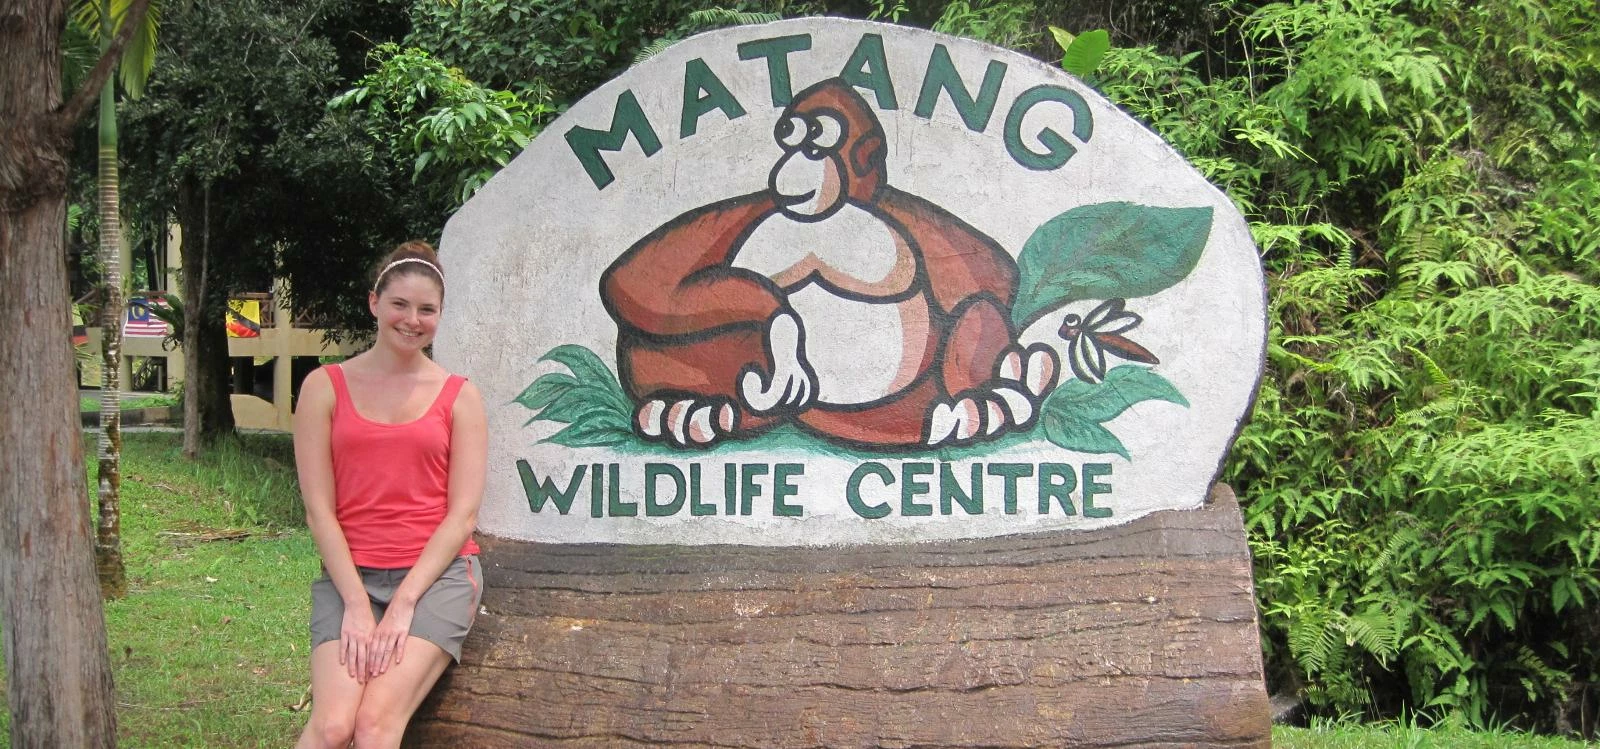 Anna Godwin of accountancy firm HURST volunteered for a month at the Matang Wildlife Sanctuary in Bo